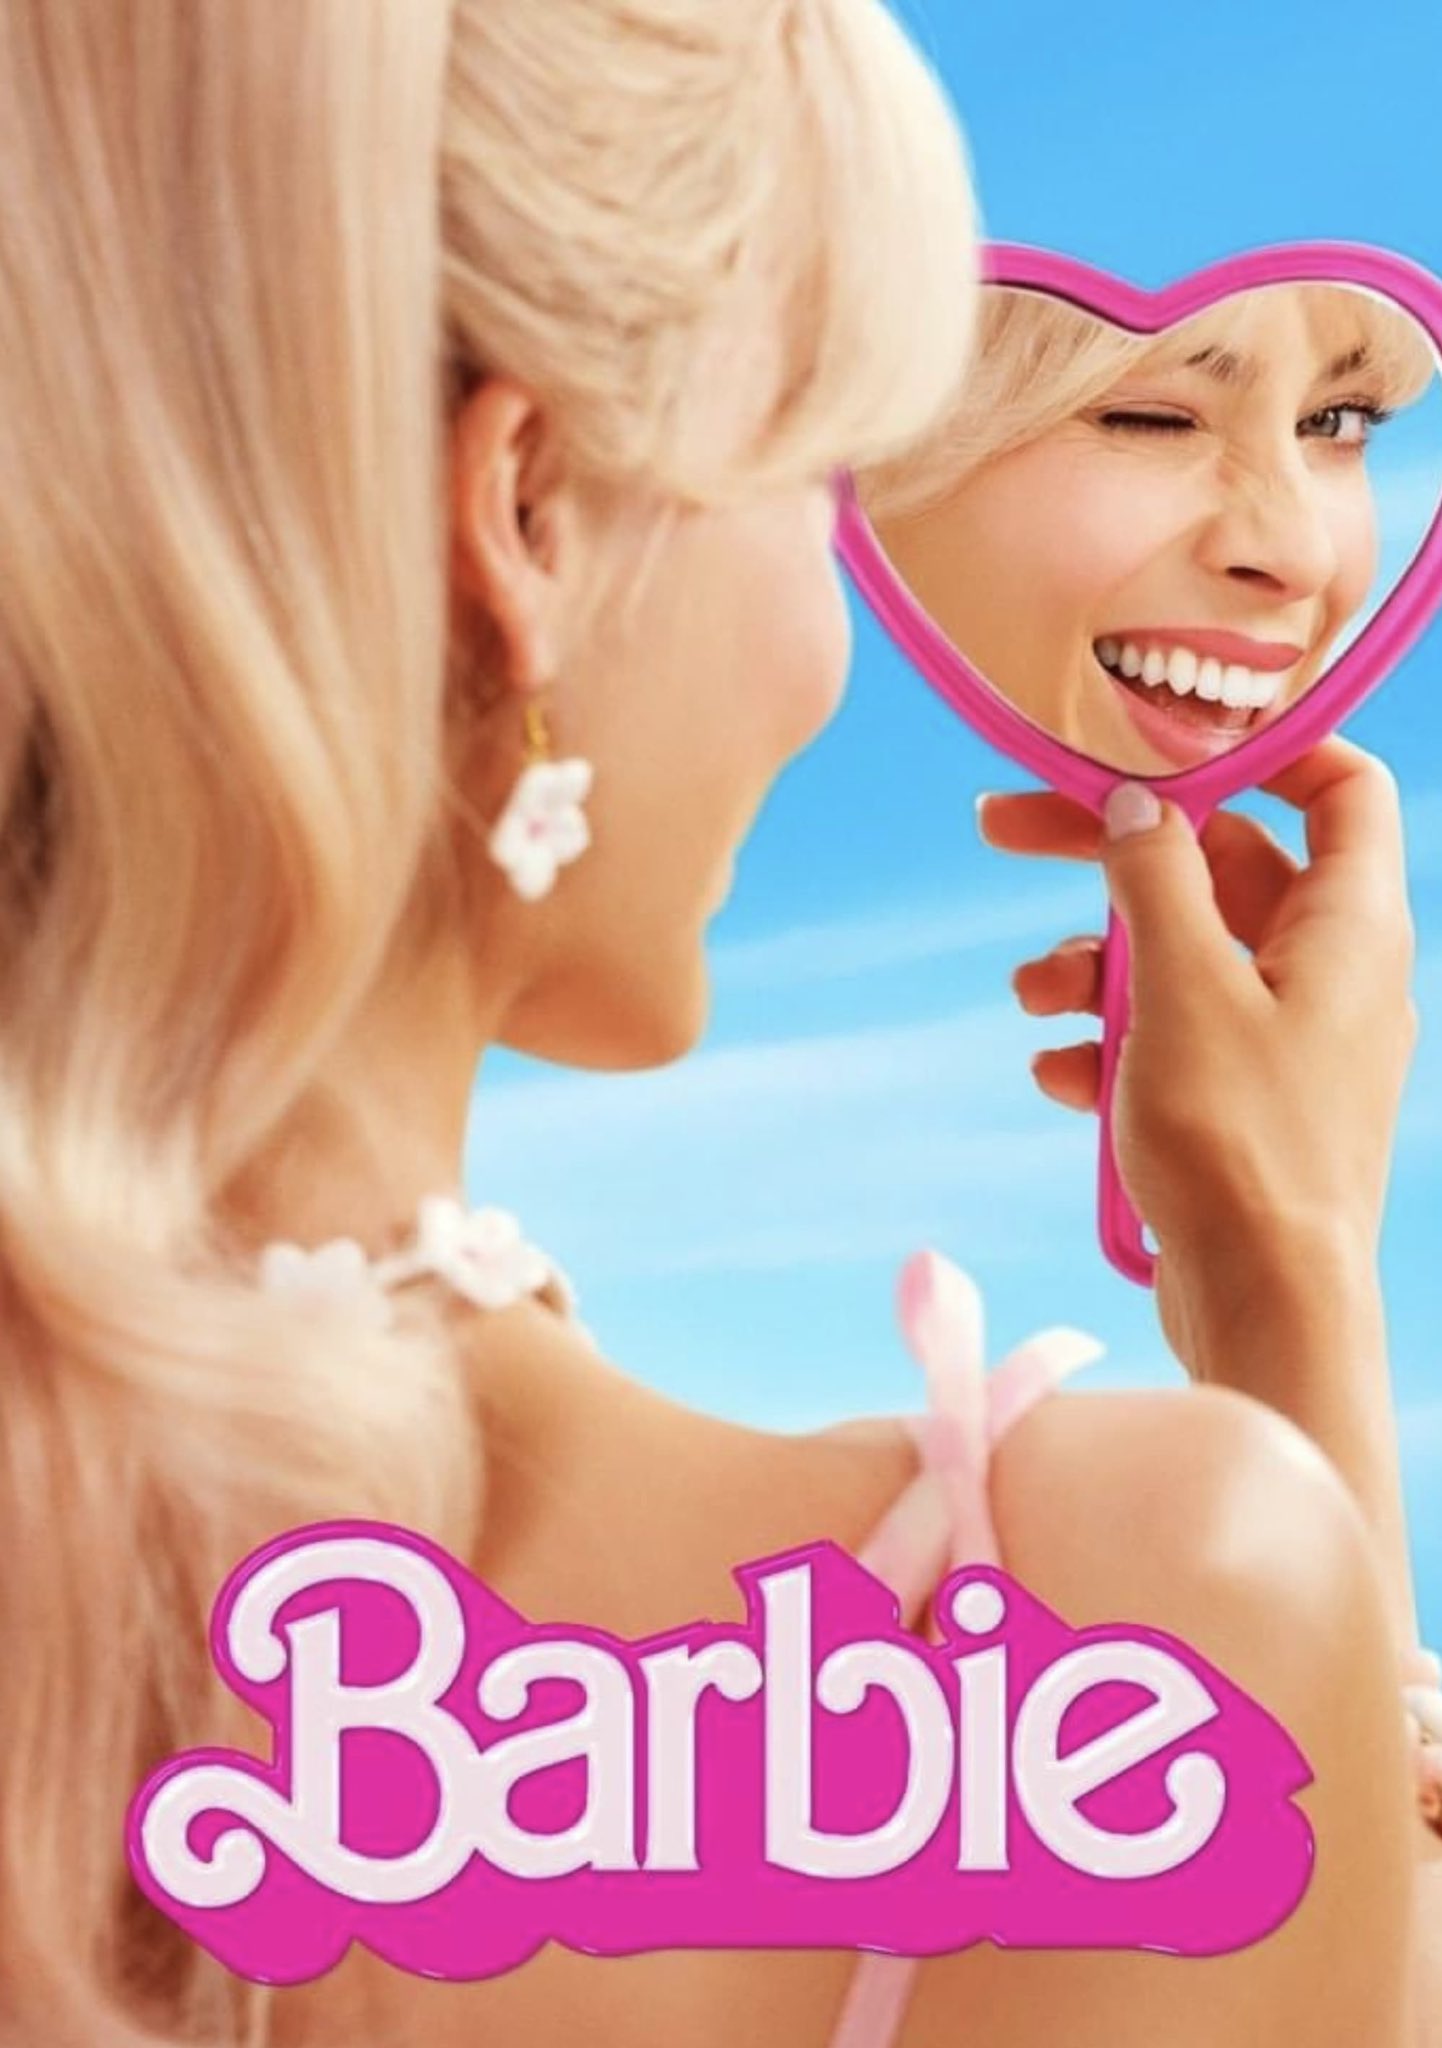 Barbie - Movie Reviews - Rotten Tomatoes